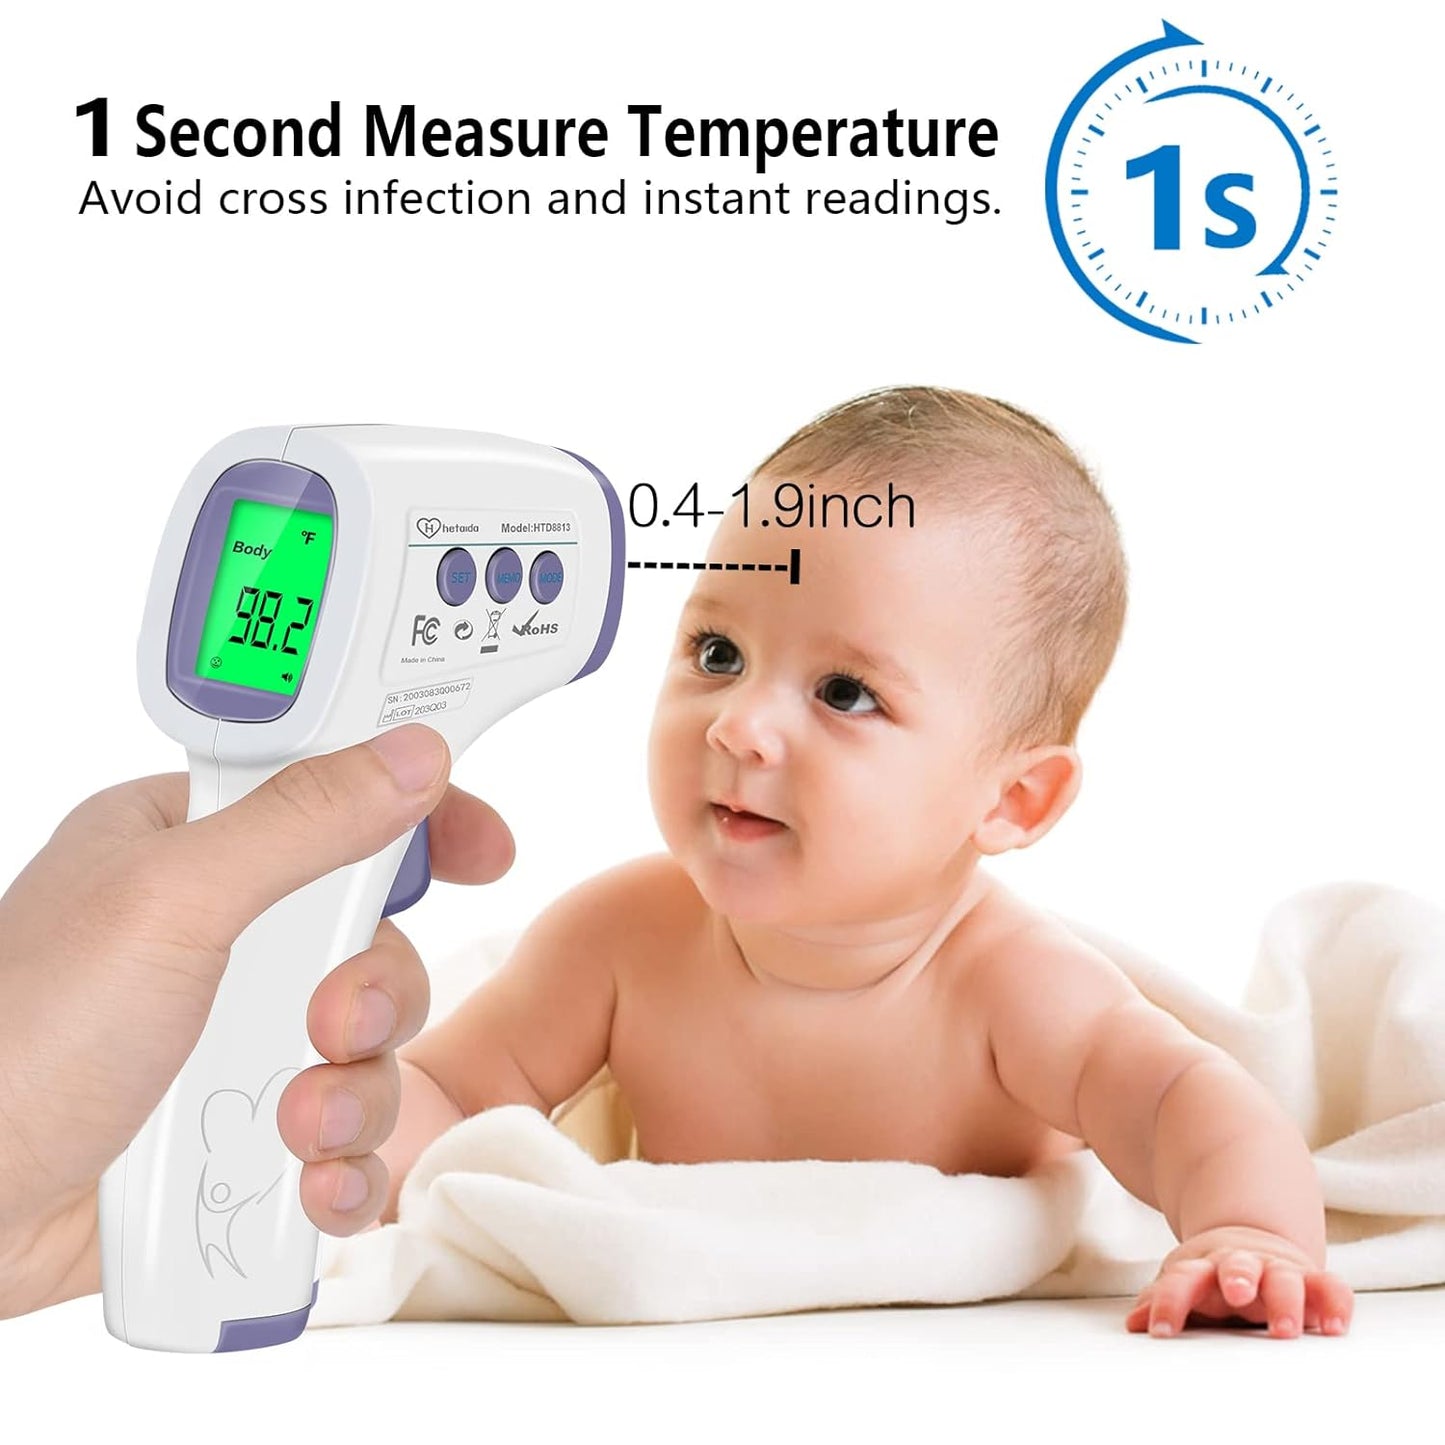 Digital Thermometer for Adults and Kids, No Touch Forehead Thermometer for Baby, 2 in 1 Body Surface Mode Infrared Thermometer with Fever Alarm and Instant Accuracy Readings